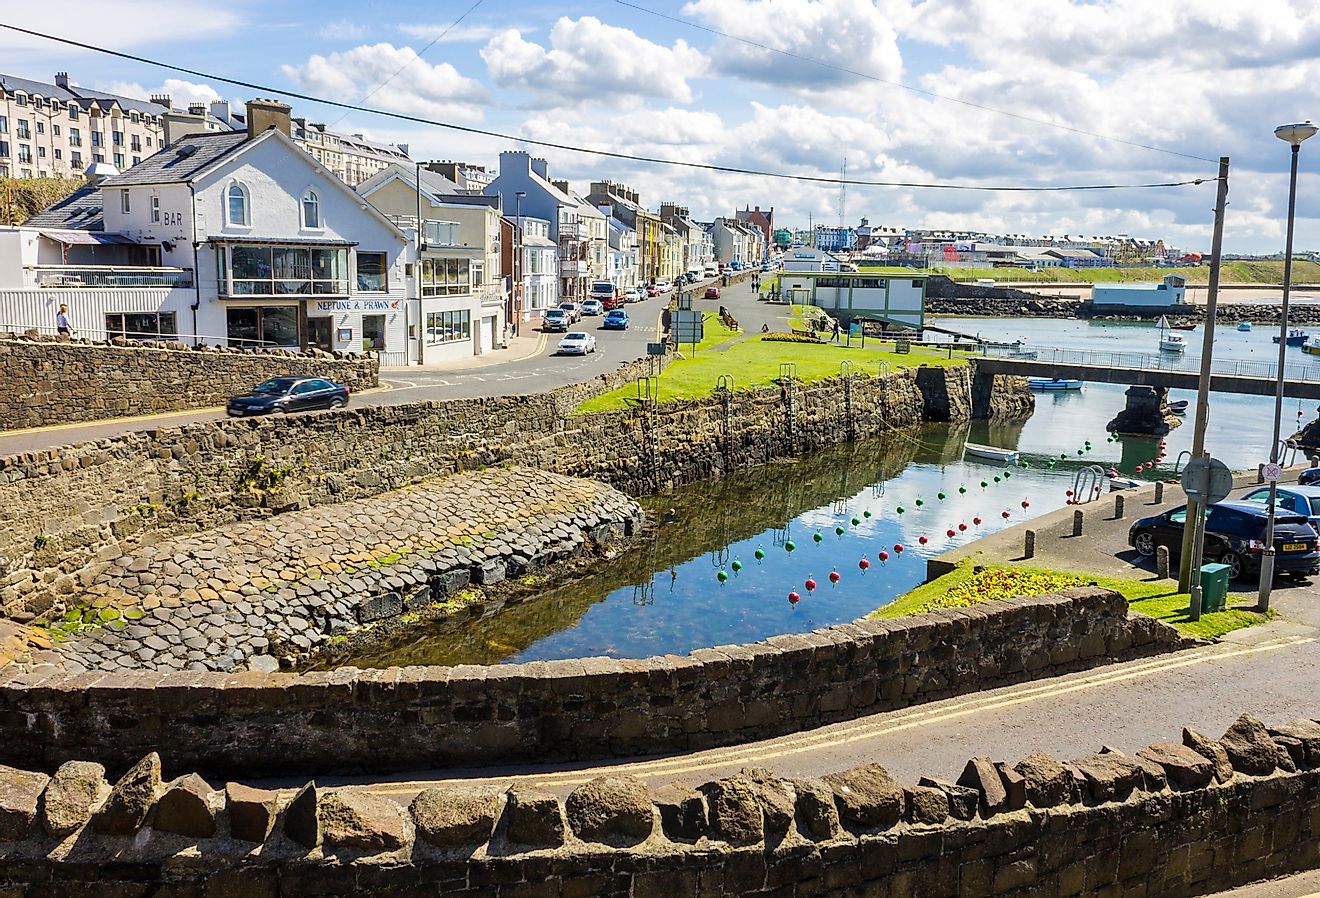 Views of the harbor in Portrush, Northern Ireland.